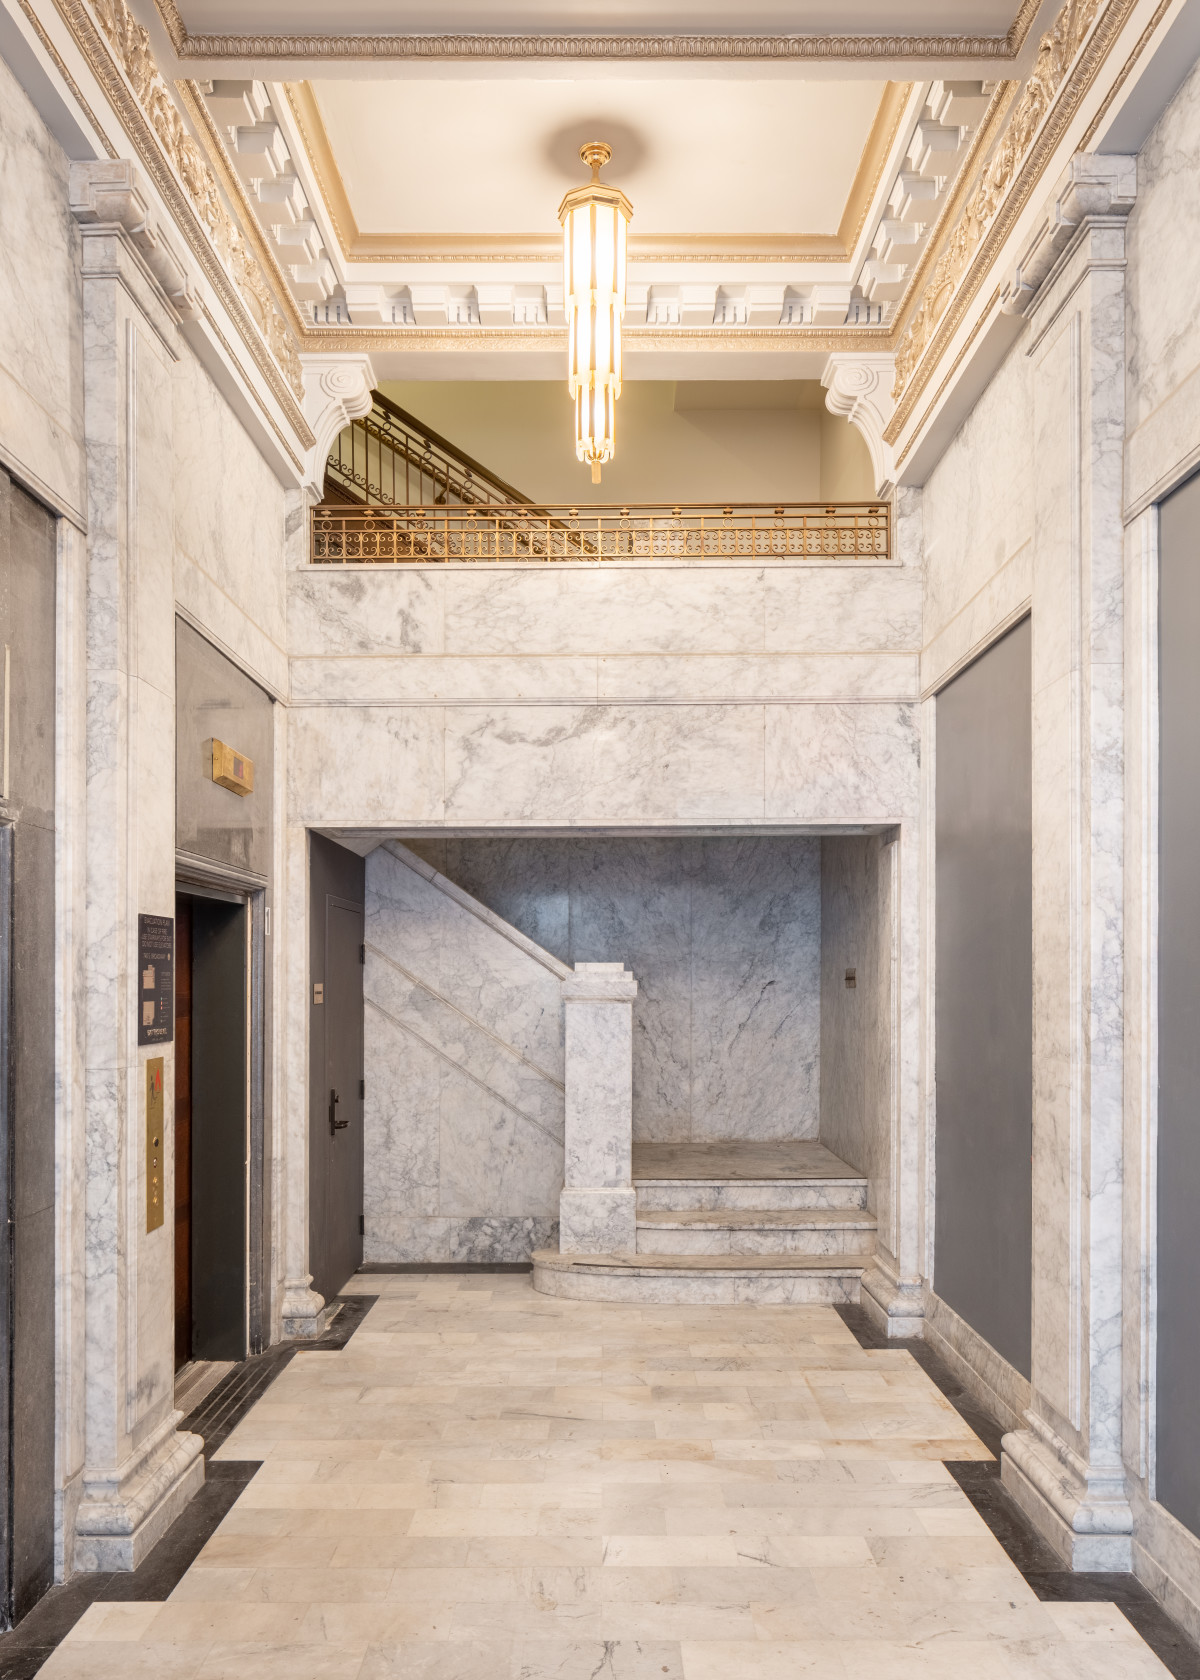 The Garland building is a classic example of early century Beaux Arts opulence, which fell victim to the economic decline of the Broadway corridor in the post war years.  Decades of deferred maintenance provided an opportunity for renovation of the 11-story steel framed tower.